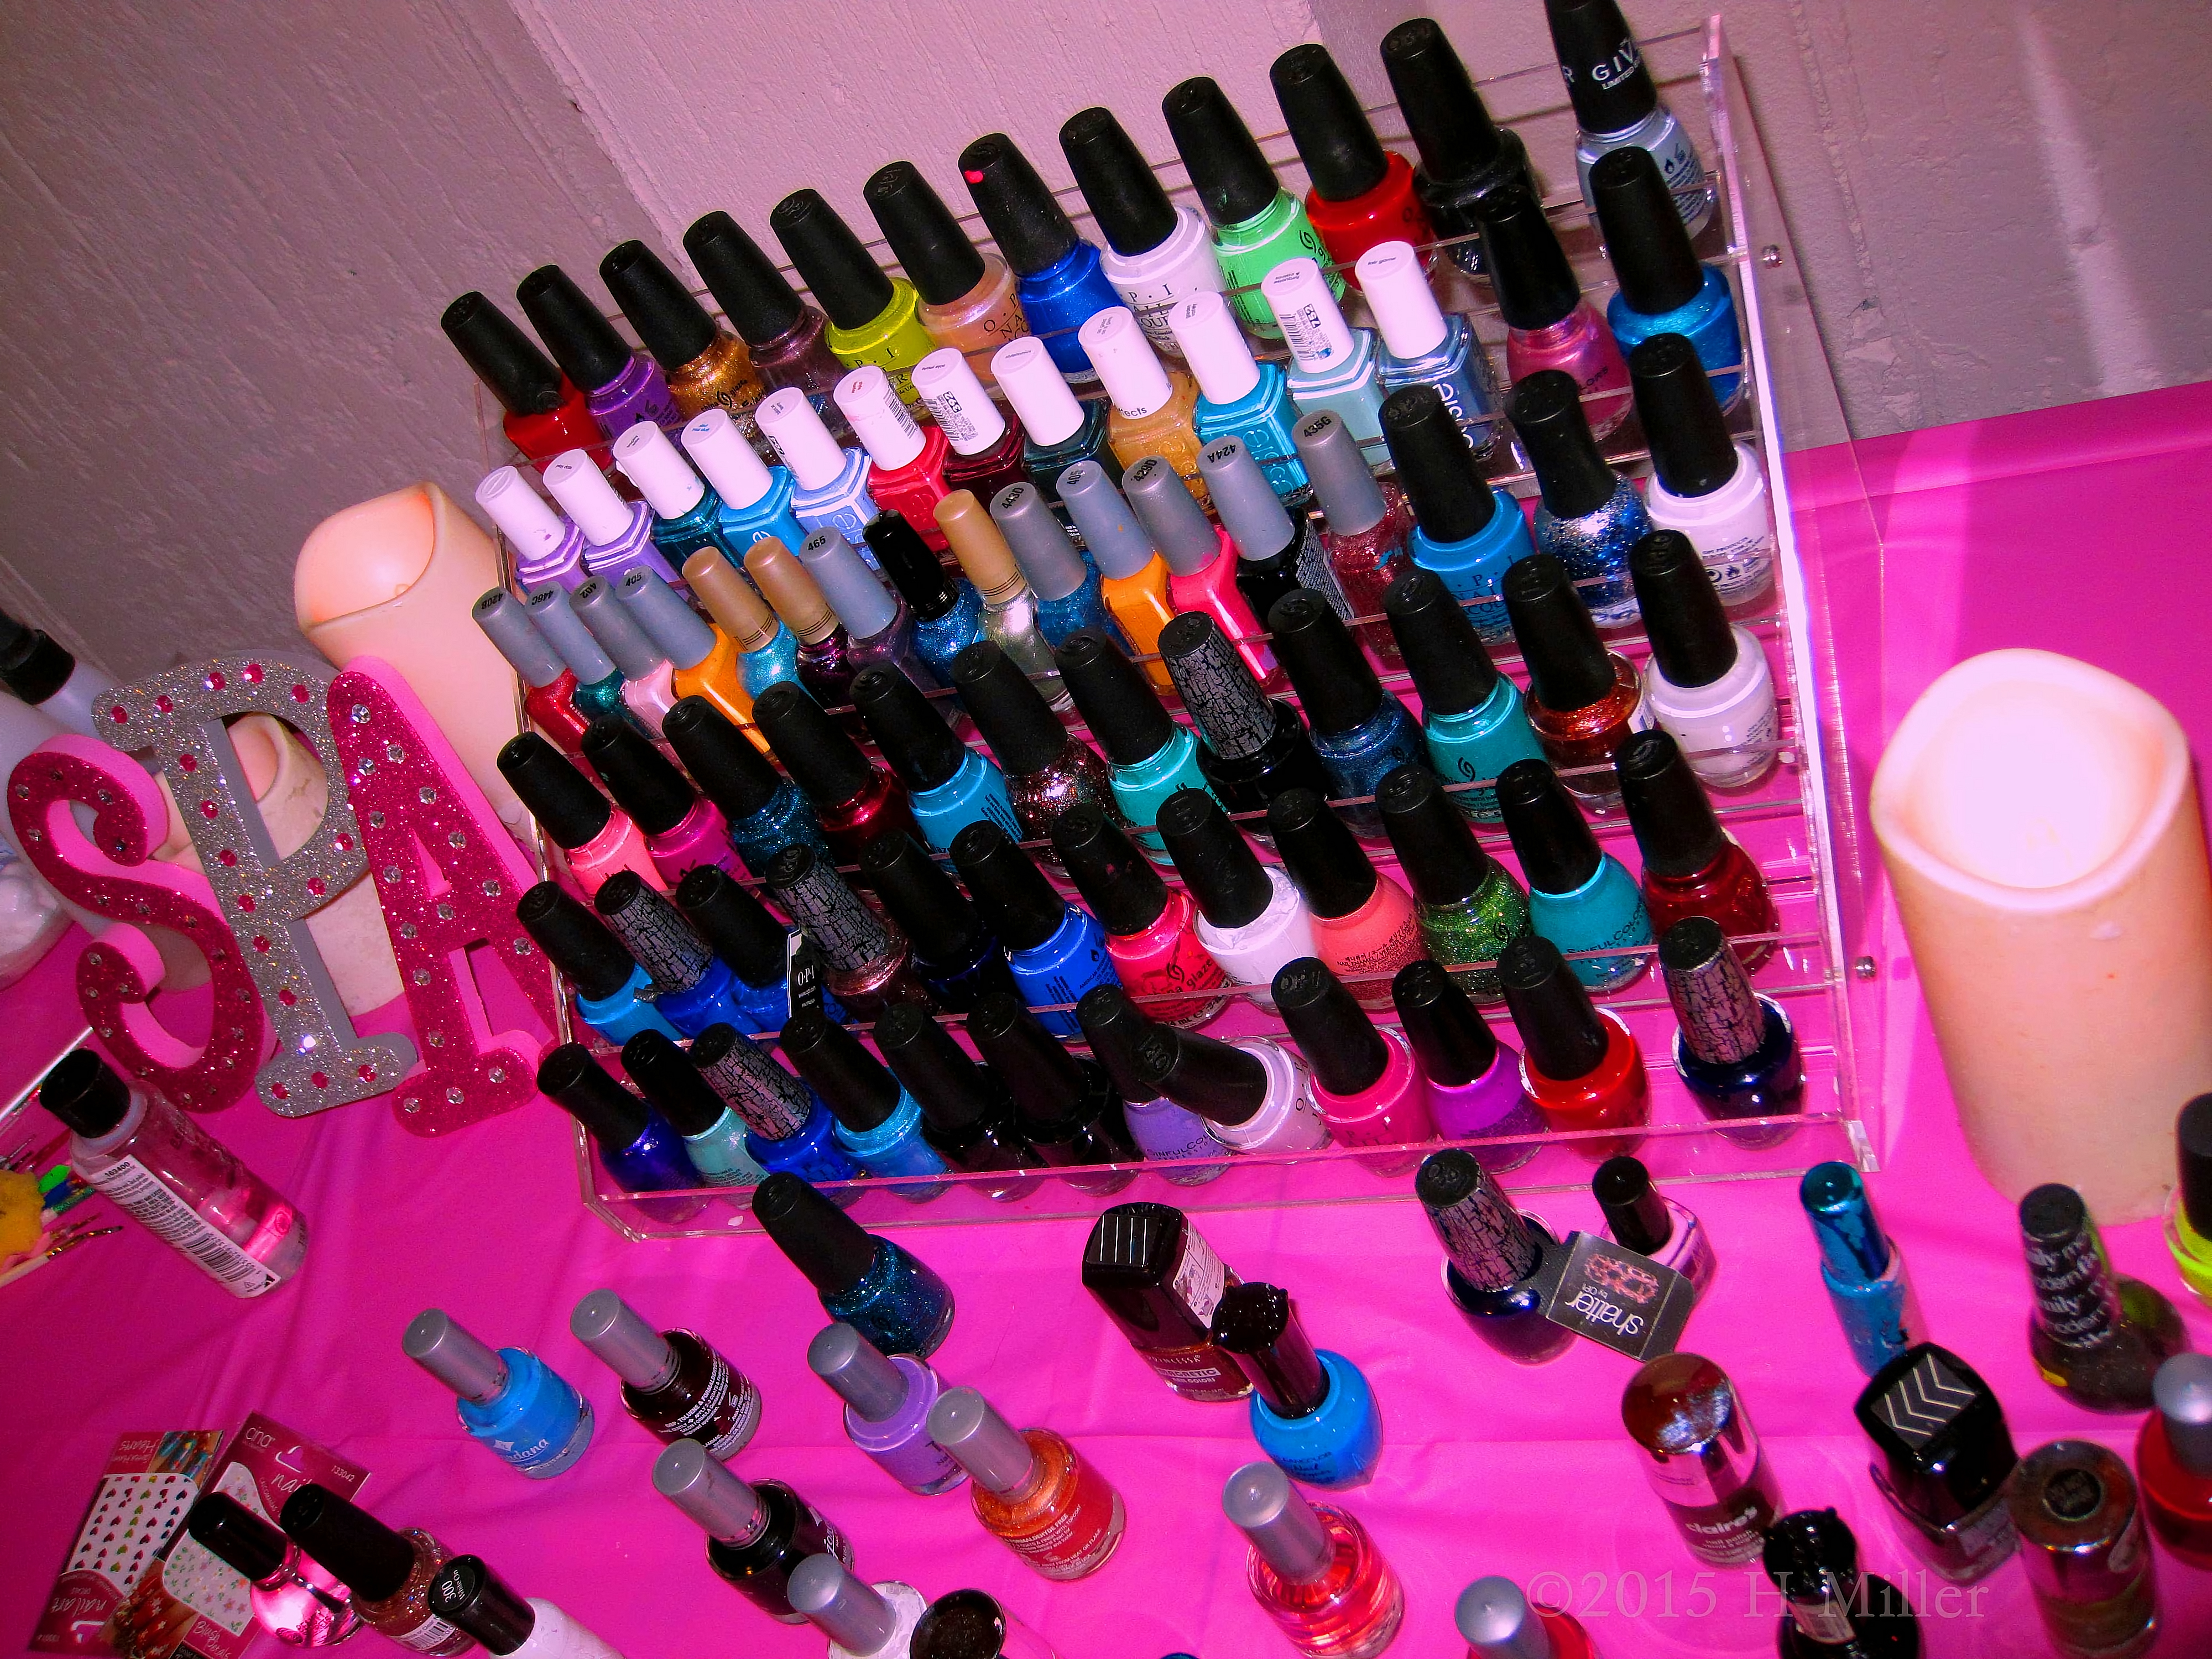 Some Of Our Favorite Shades Of Nail Polish! 